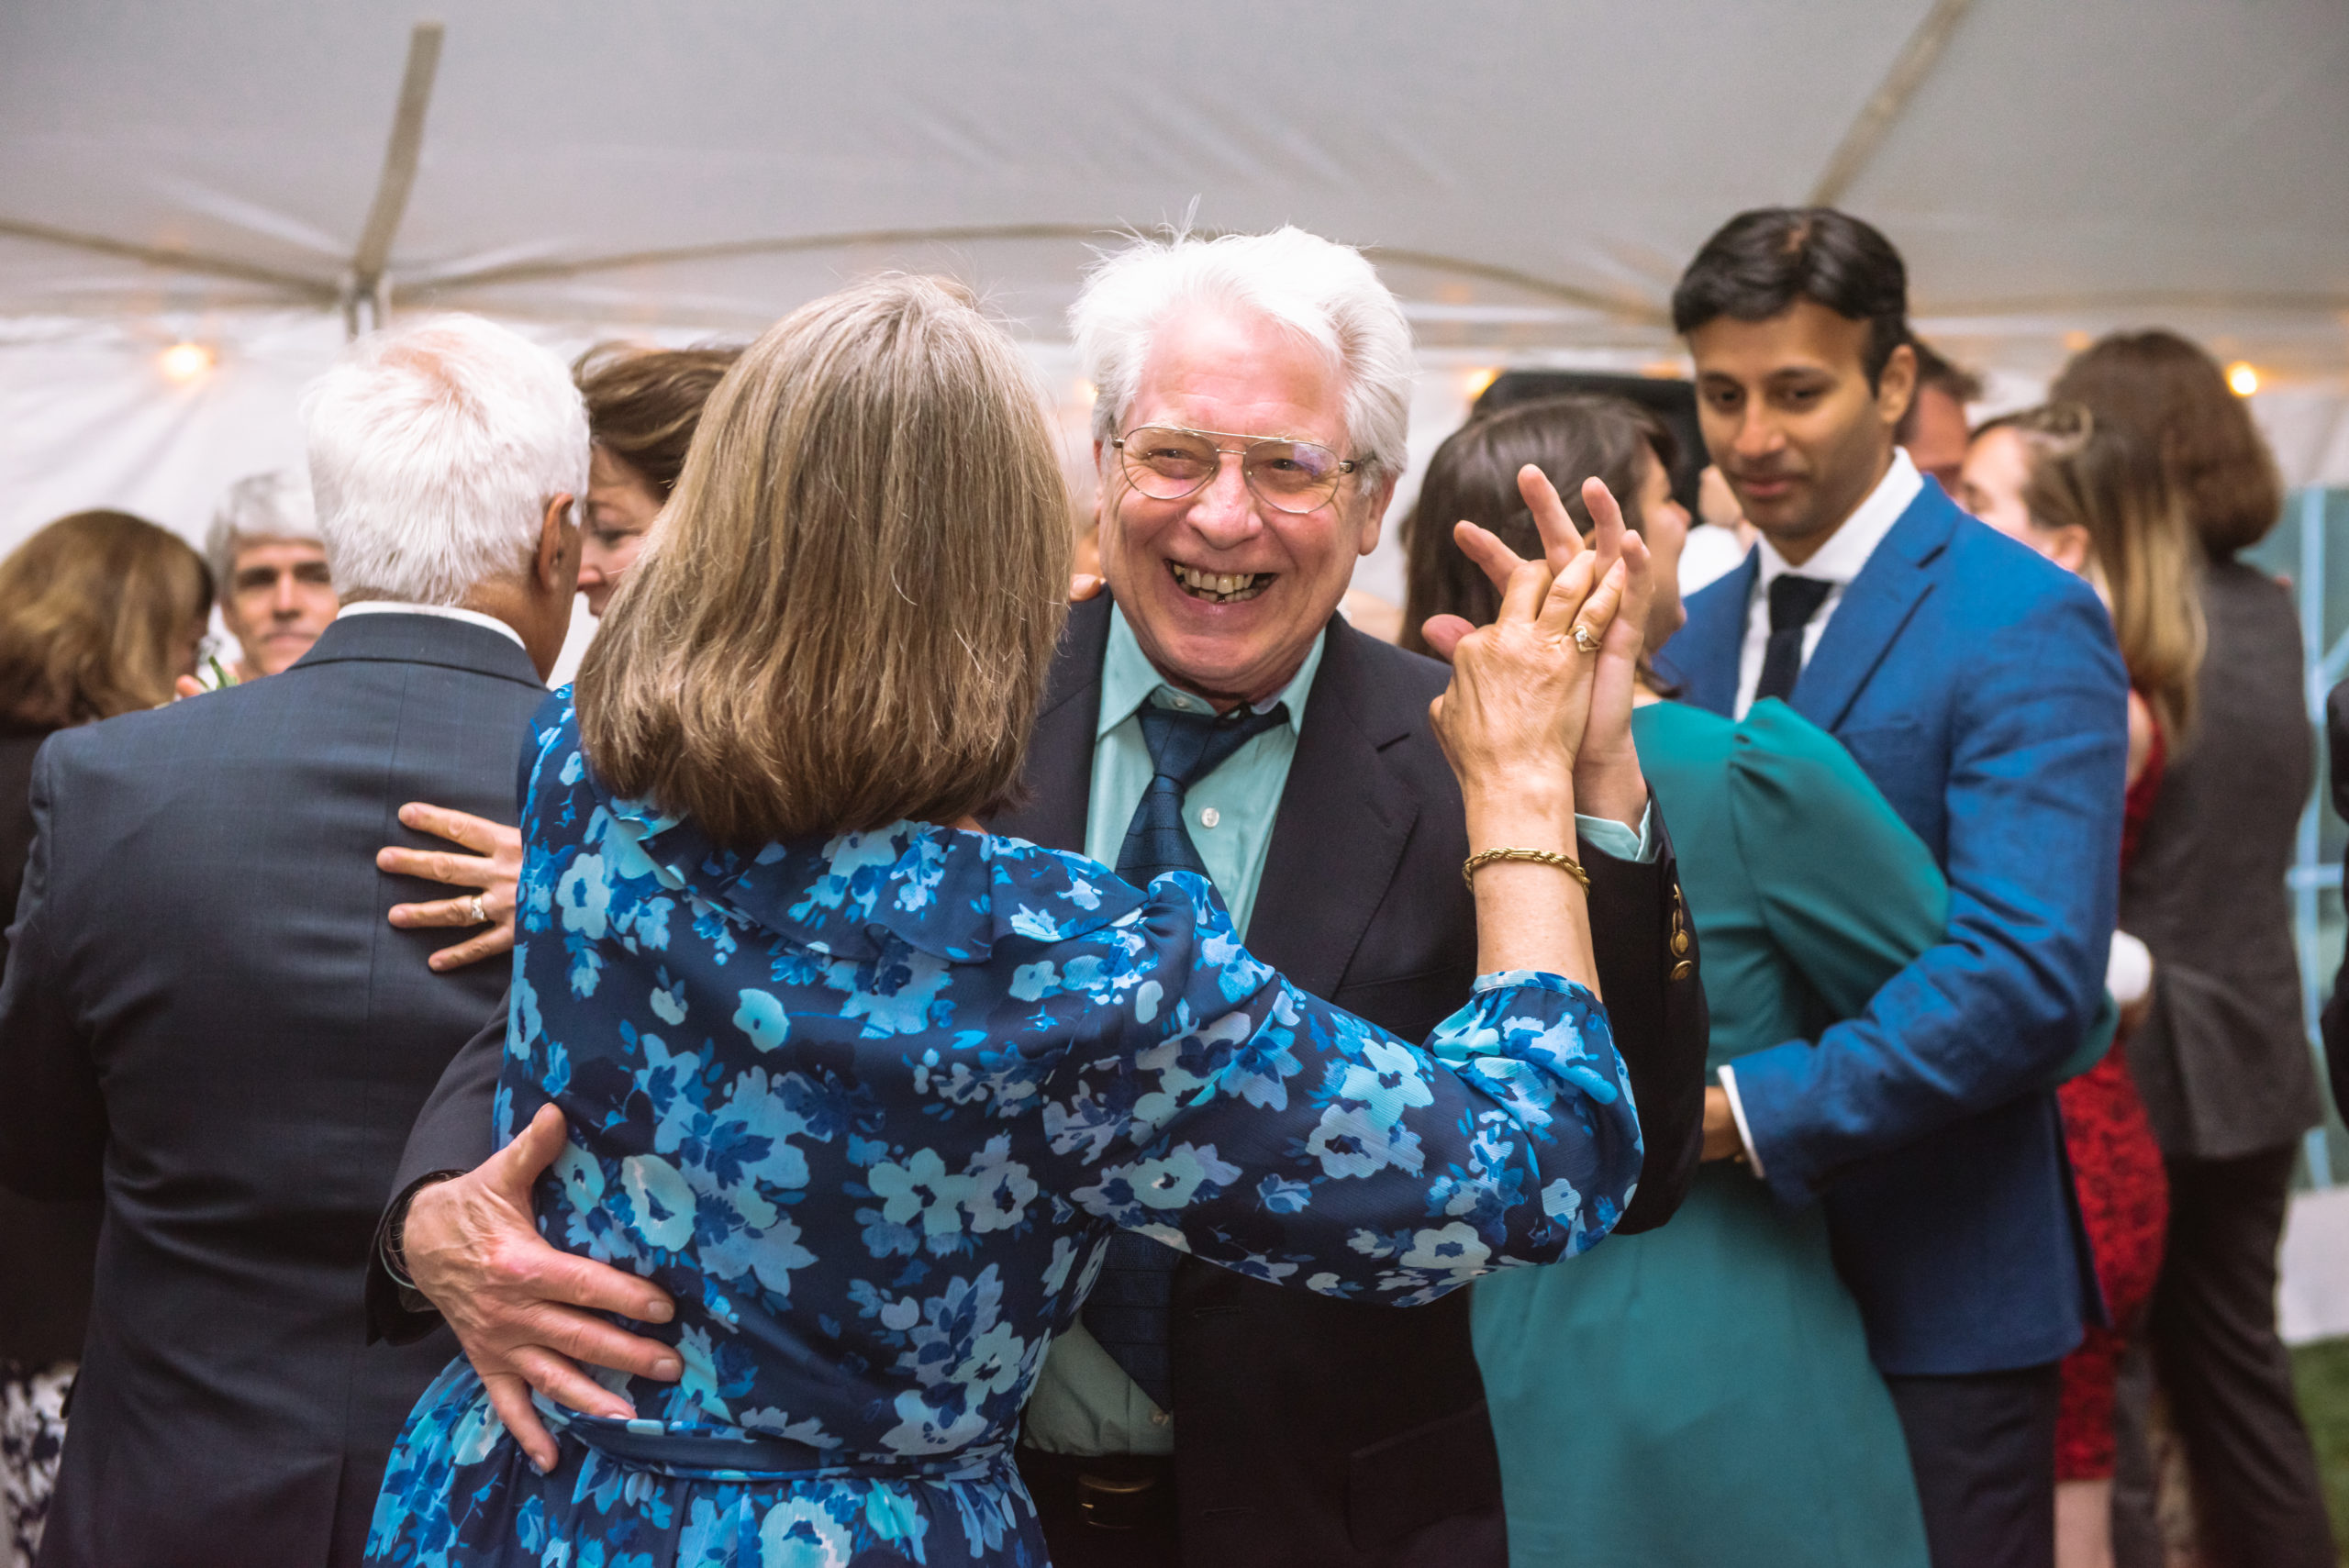 Wedding guests slow-dancing in the tented reception. There is an older couple front and center. The woman's back is turned away from the camera and her partner is open-mouthed grinning.